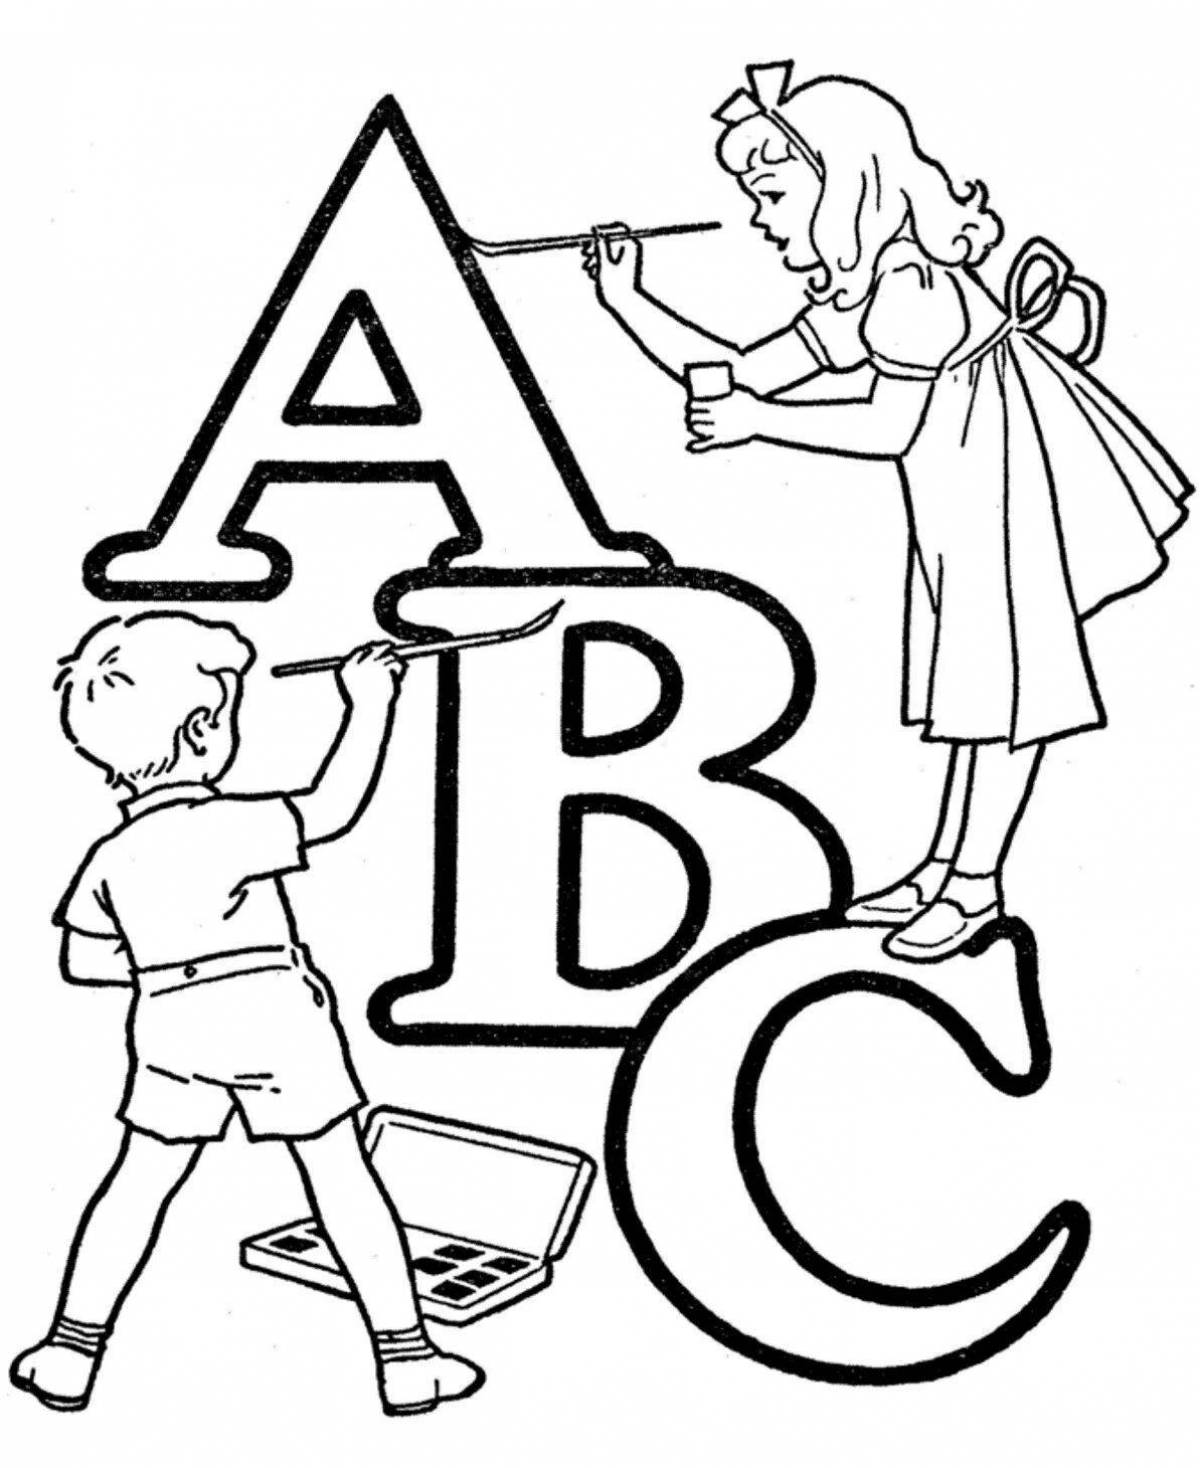 Radiant coloring page english alphabet